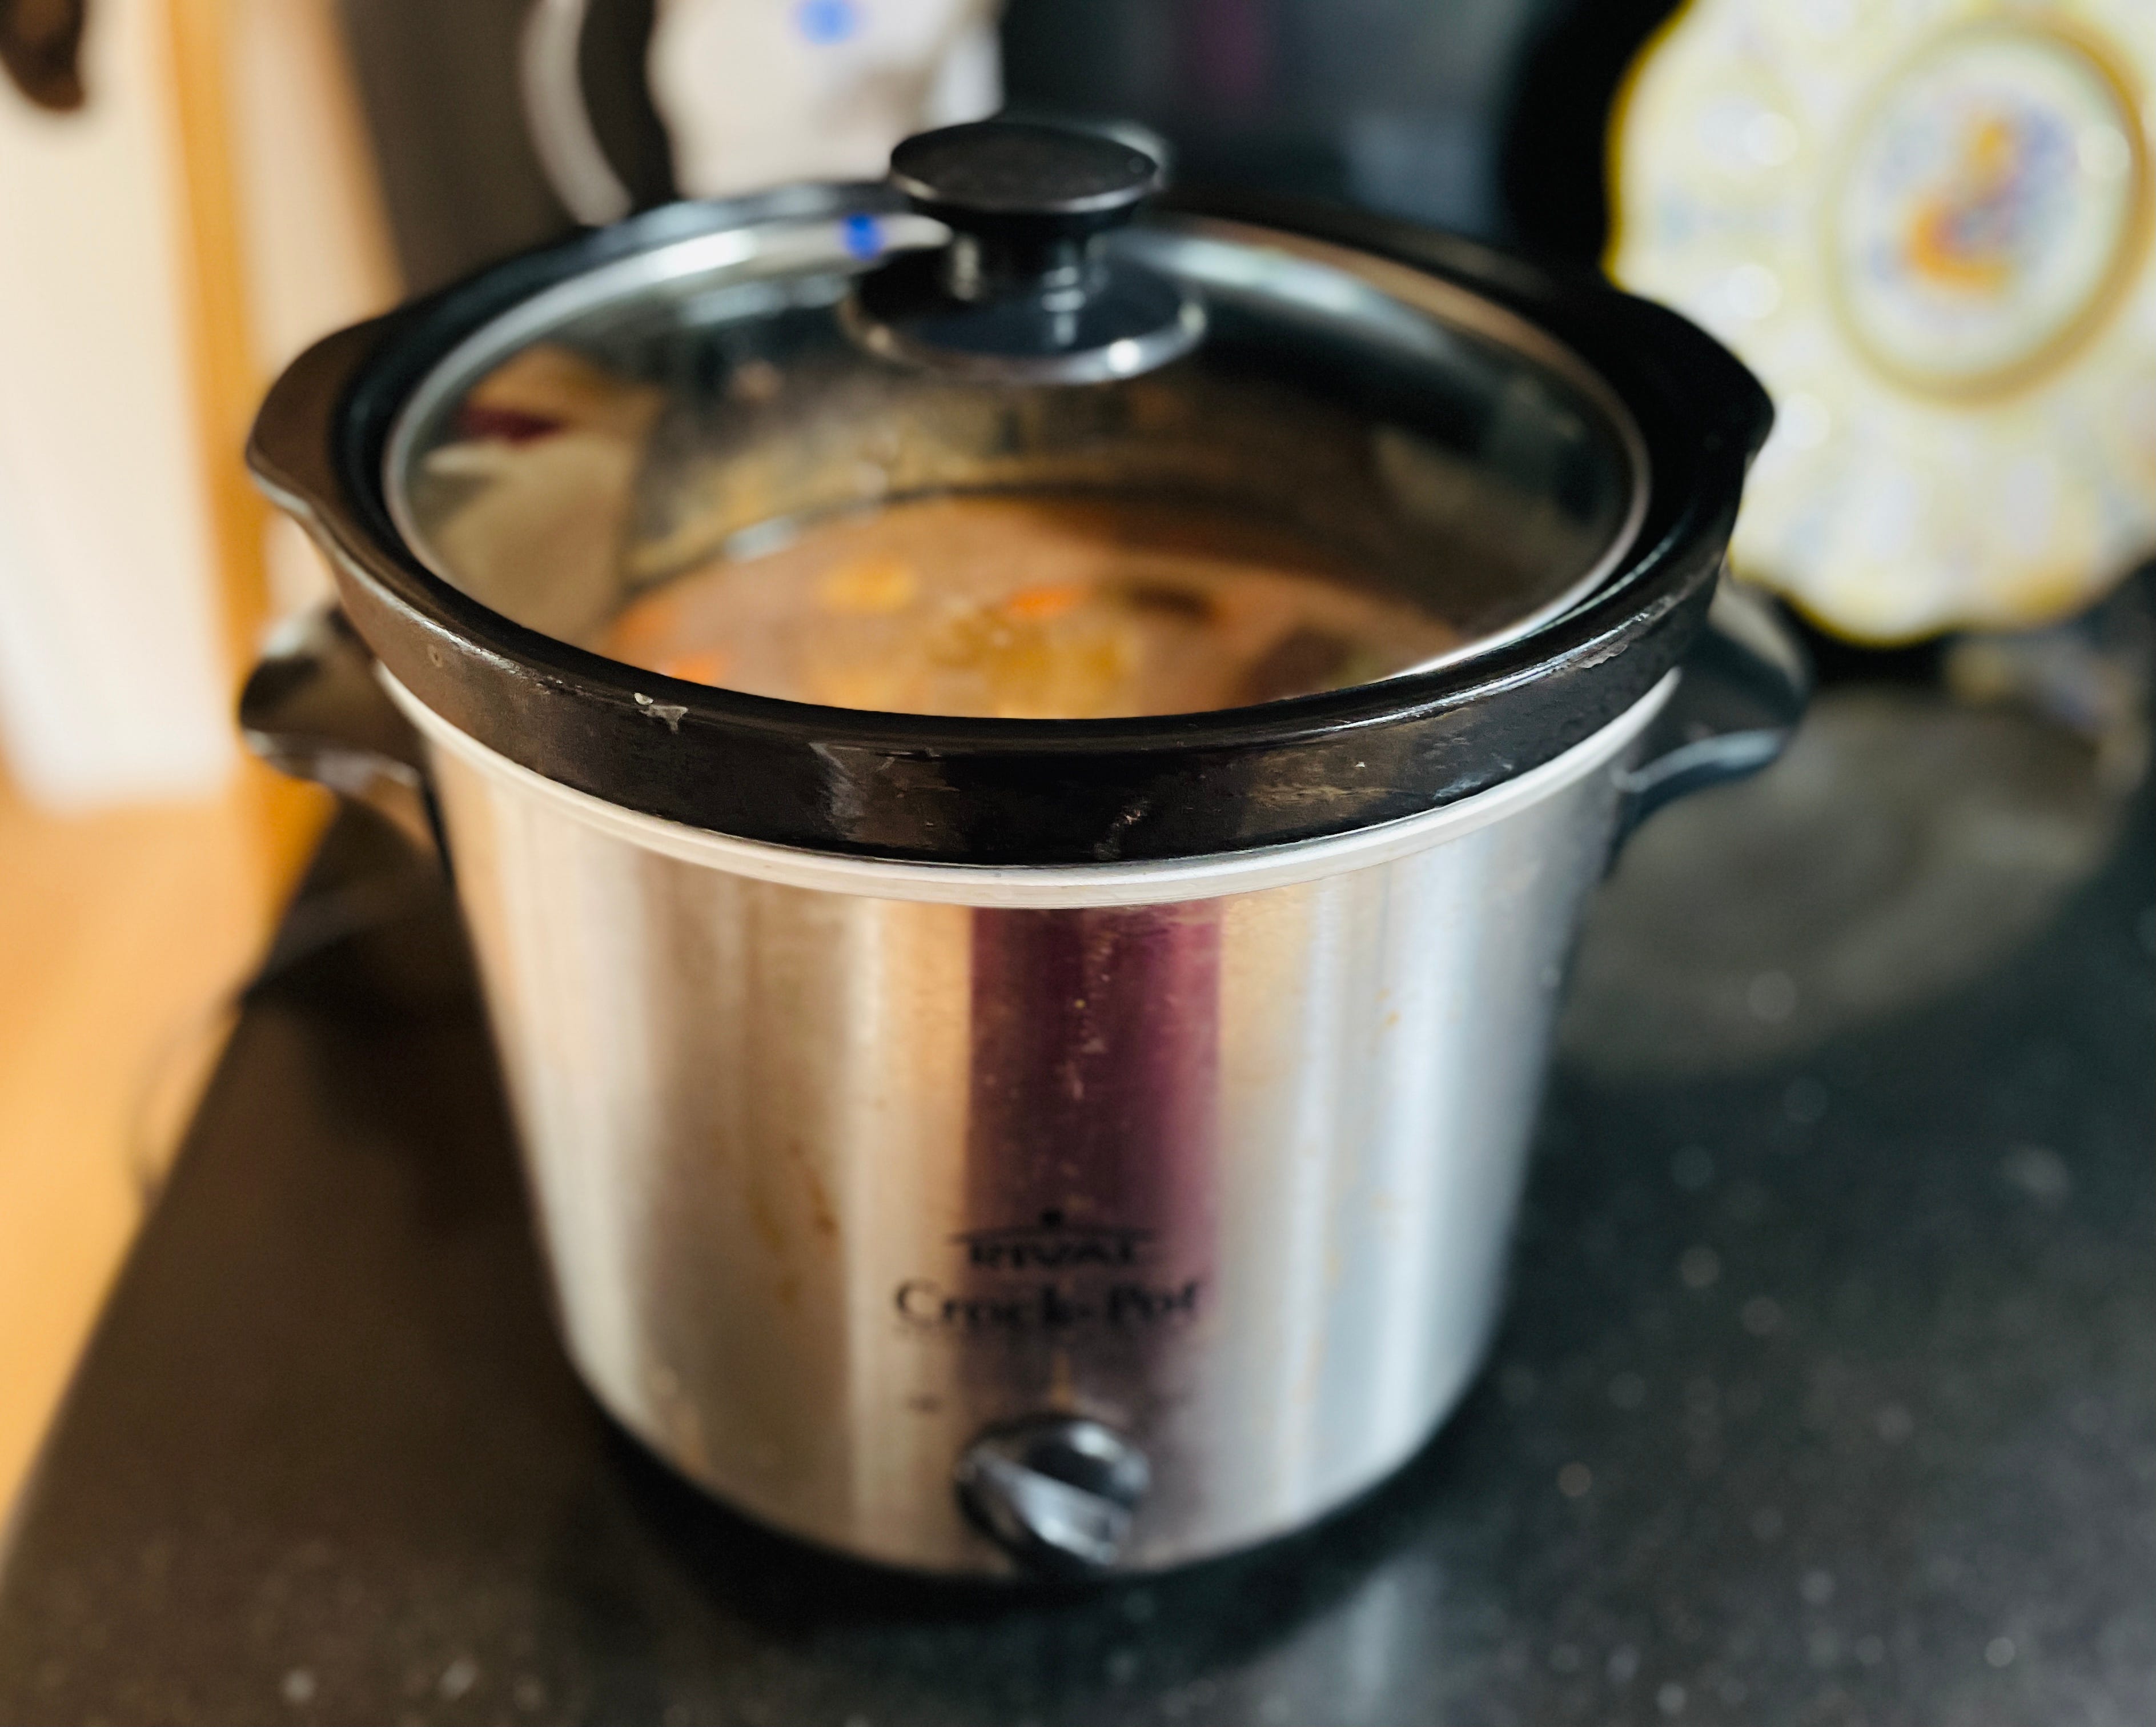 A Look at the Rival Crock Pot stoneware slow cooker 